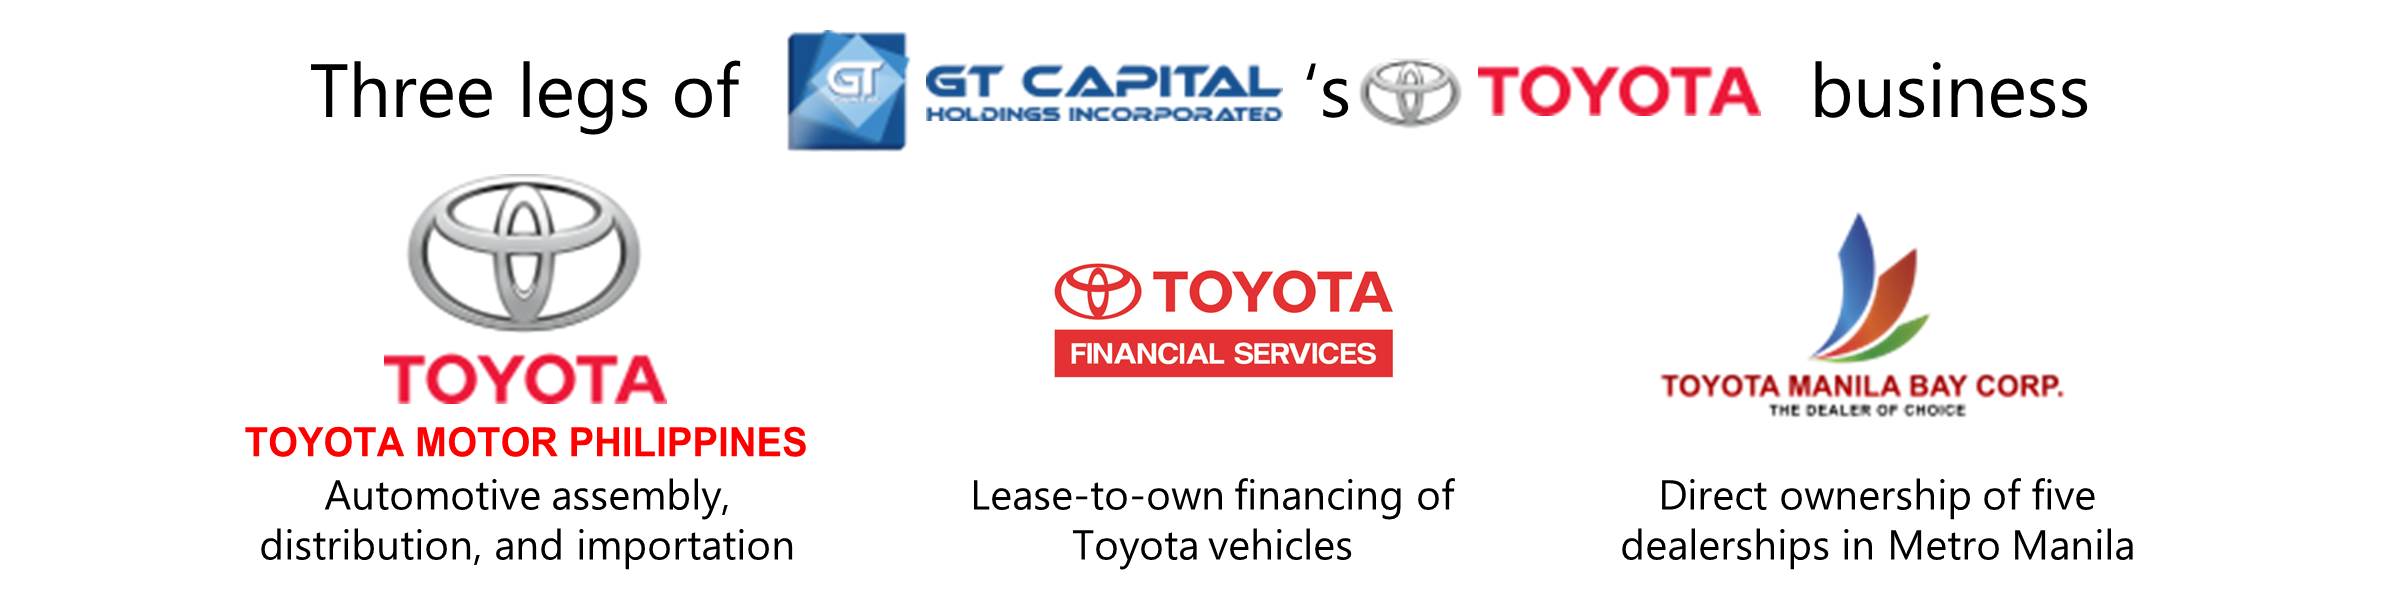 GT Capital - Toyota Motor Philippines Corp. (TMP)